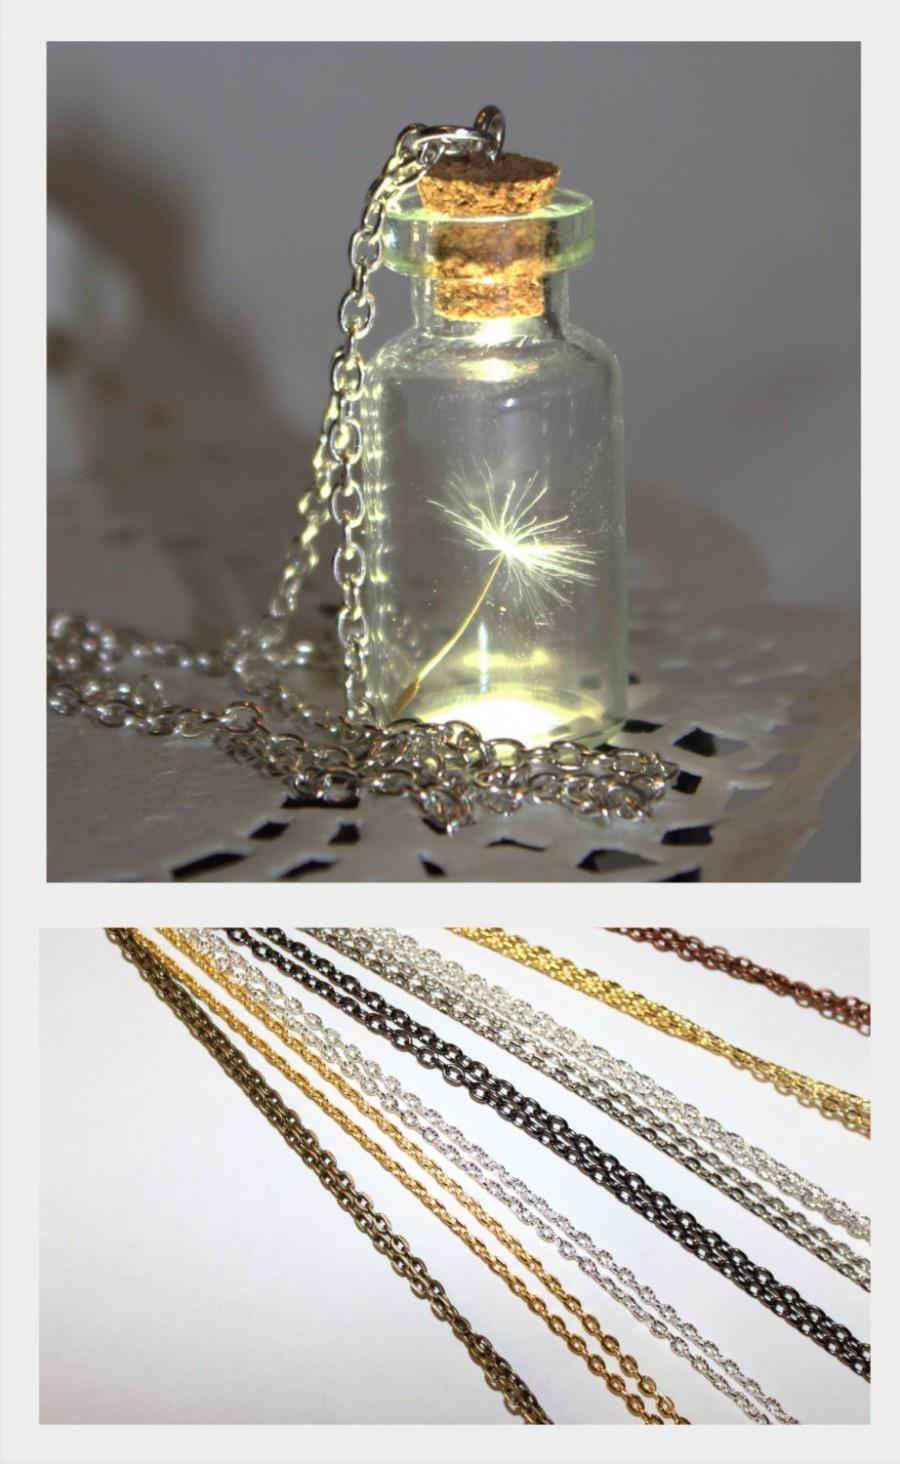 One Special Wish Dandelion Seed In A Bottle, Jar Necklace, Vial ...